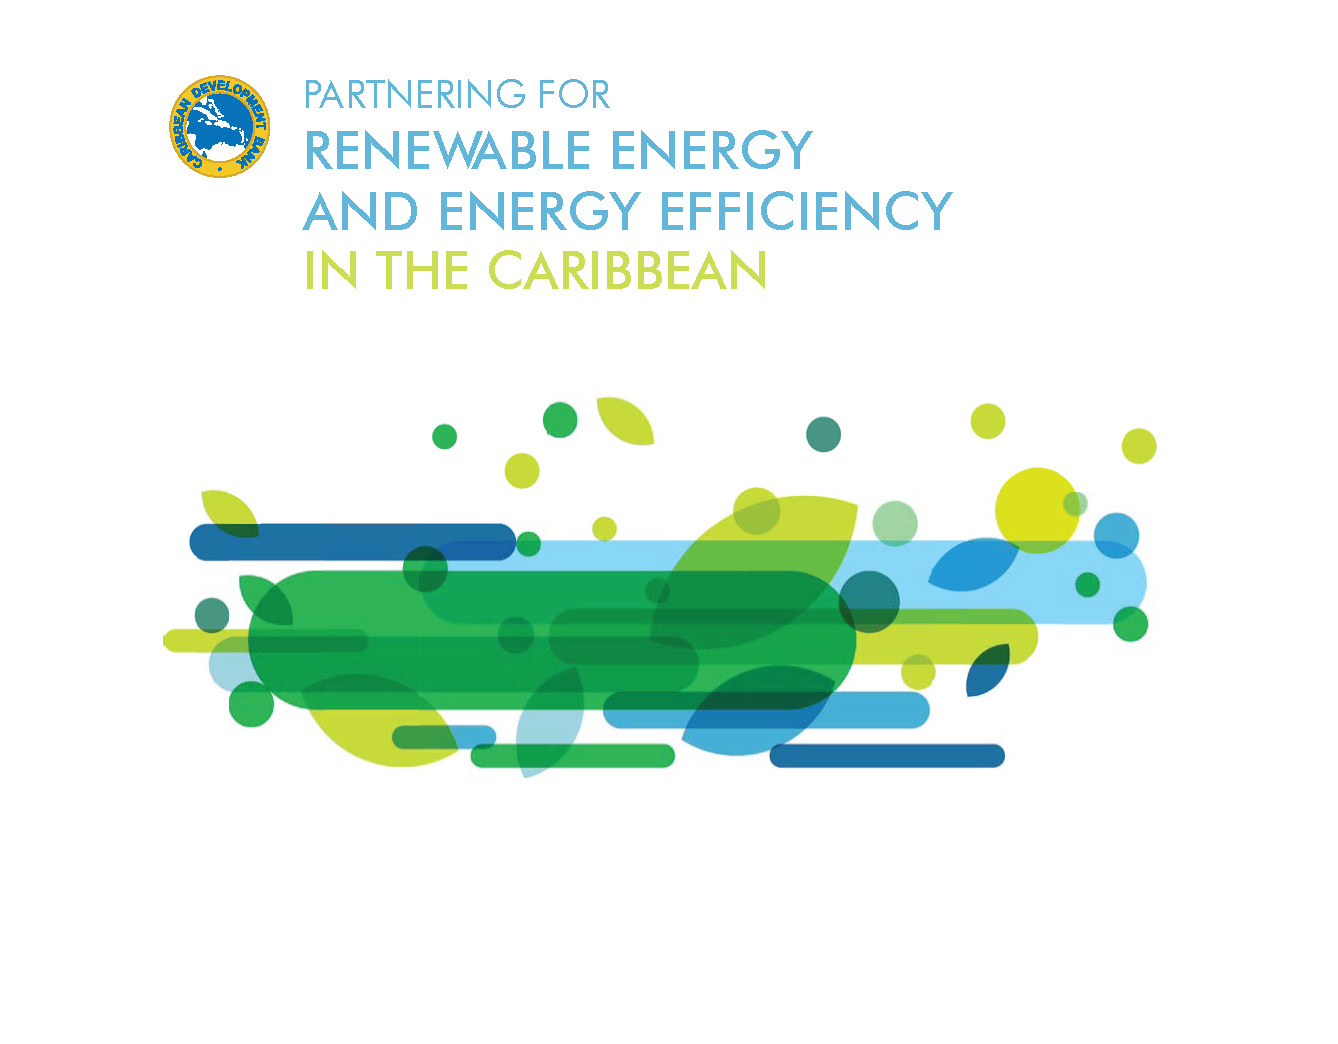 Partnering for Renewable Energy and Energy Efficiency in the Caribbean